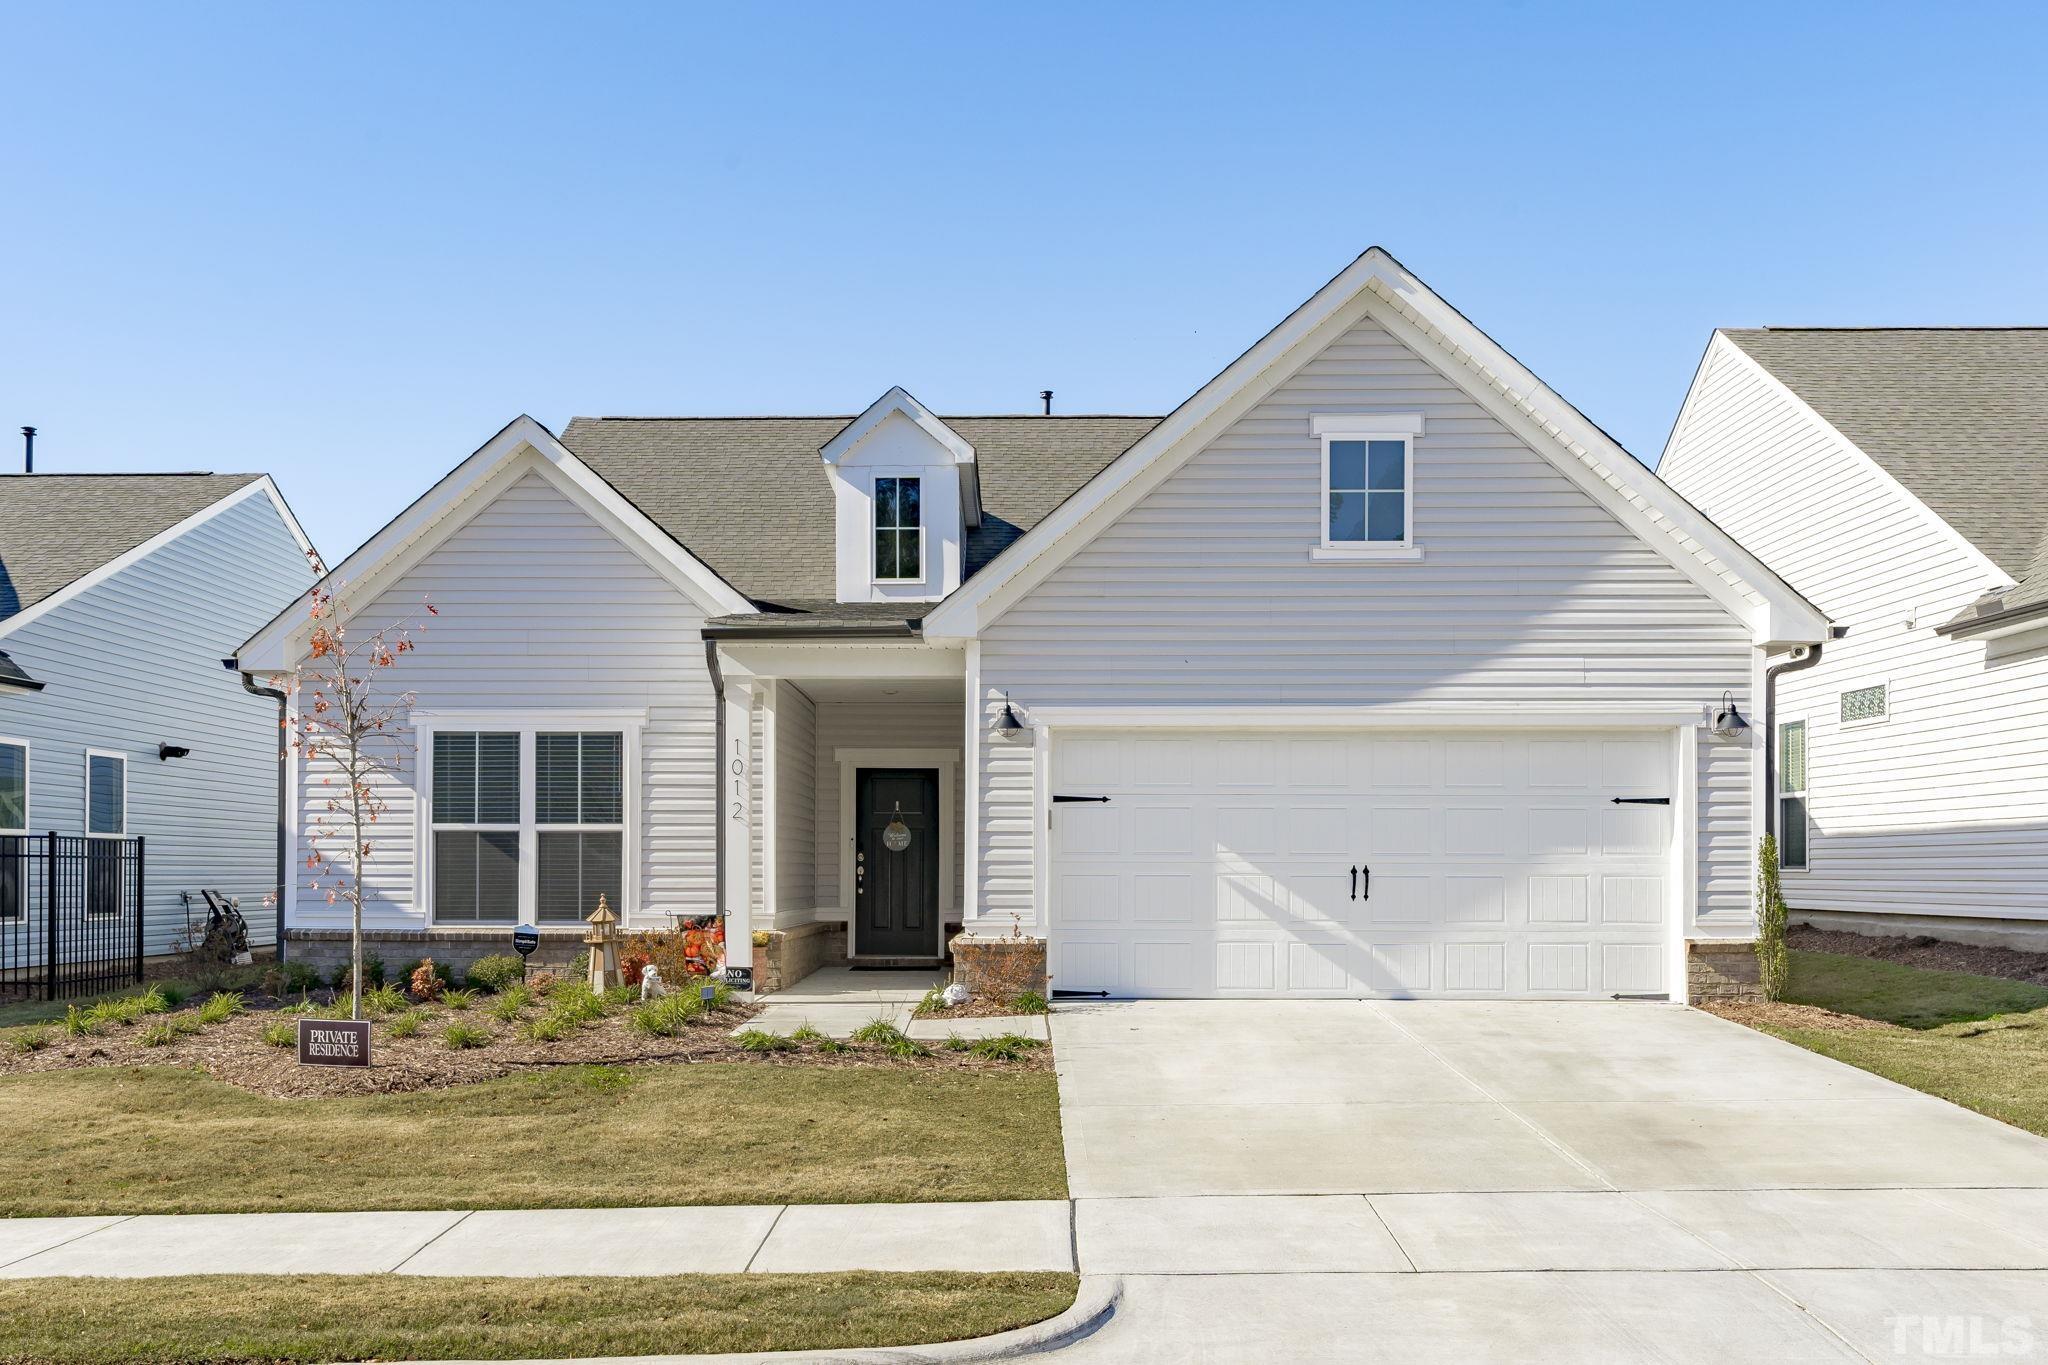 Newly Built Home in 2020 by Pulte Homes